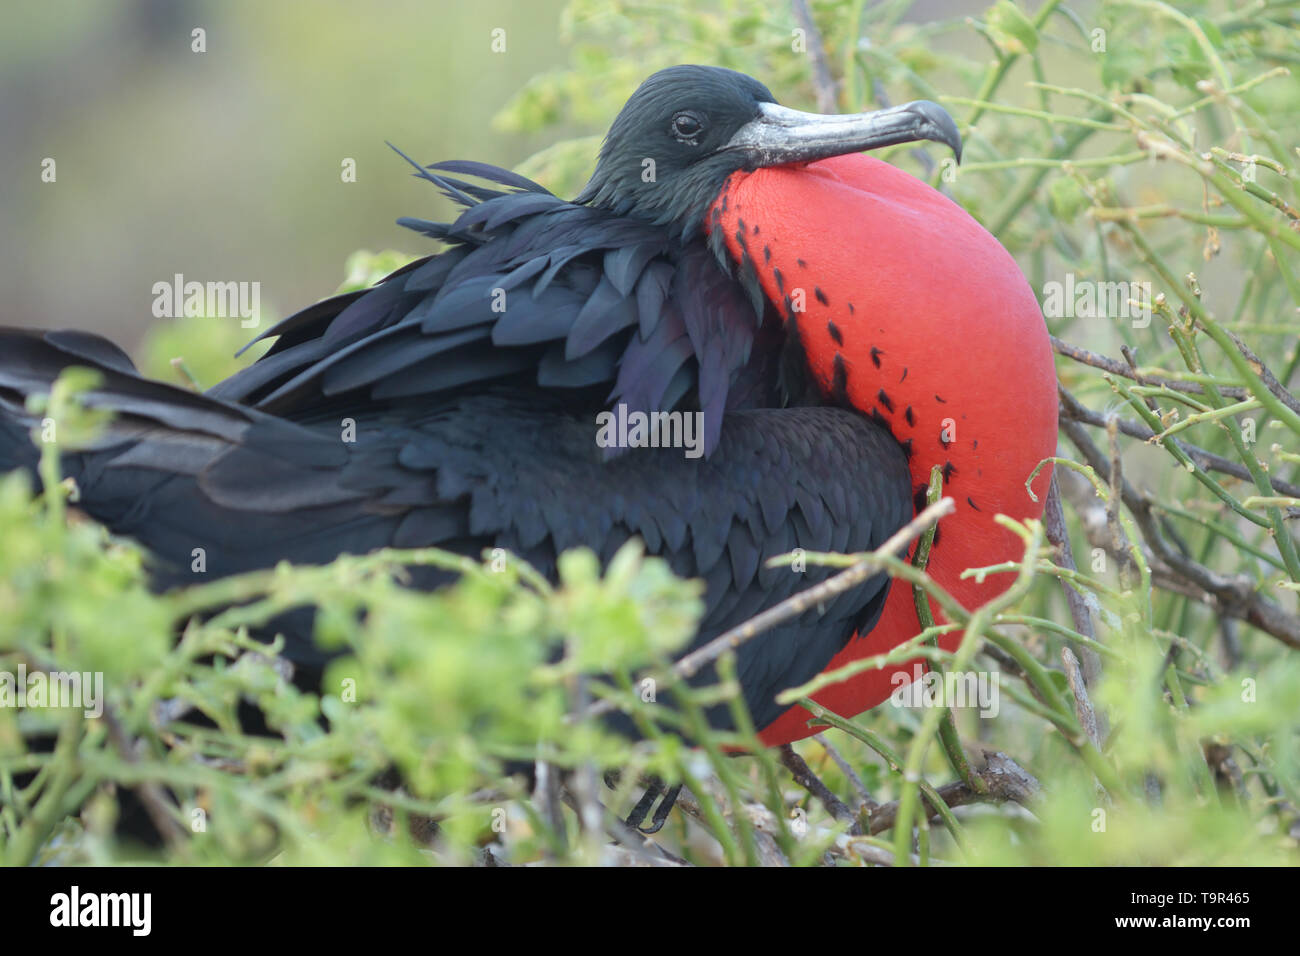 Male Magnificent Frigatebird (Fregata magnificens) displaying with inflated red gular sac on North Seymour Island in the Galapagos Islands Stock Photo